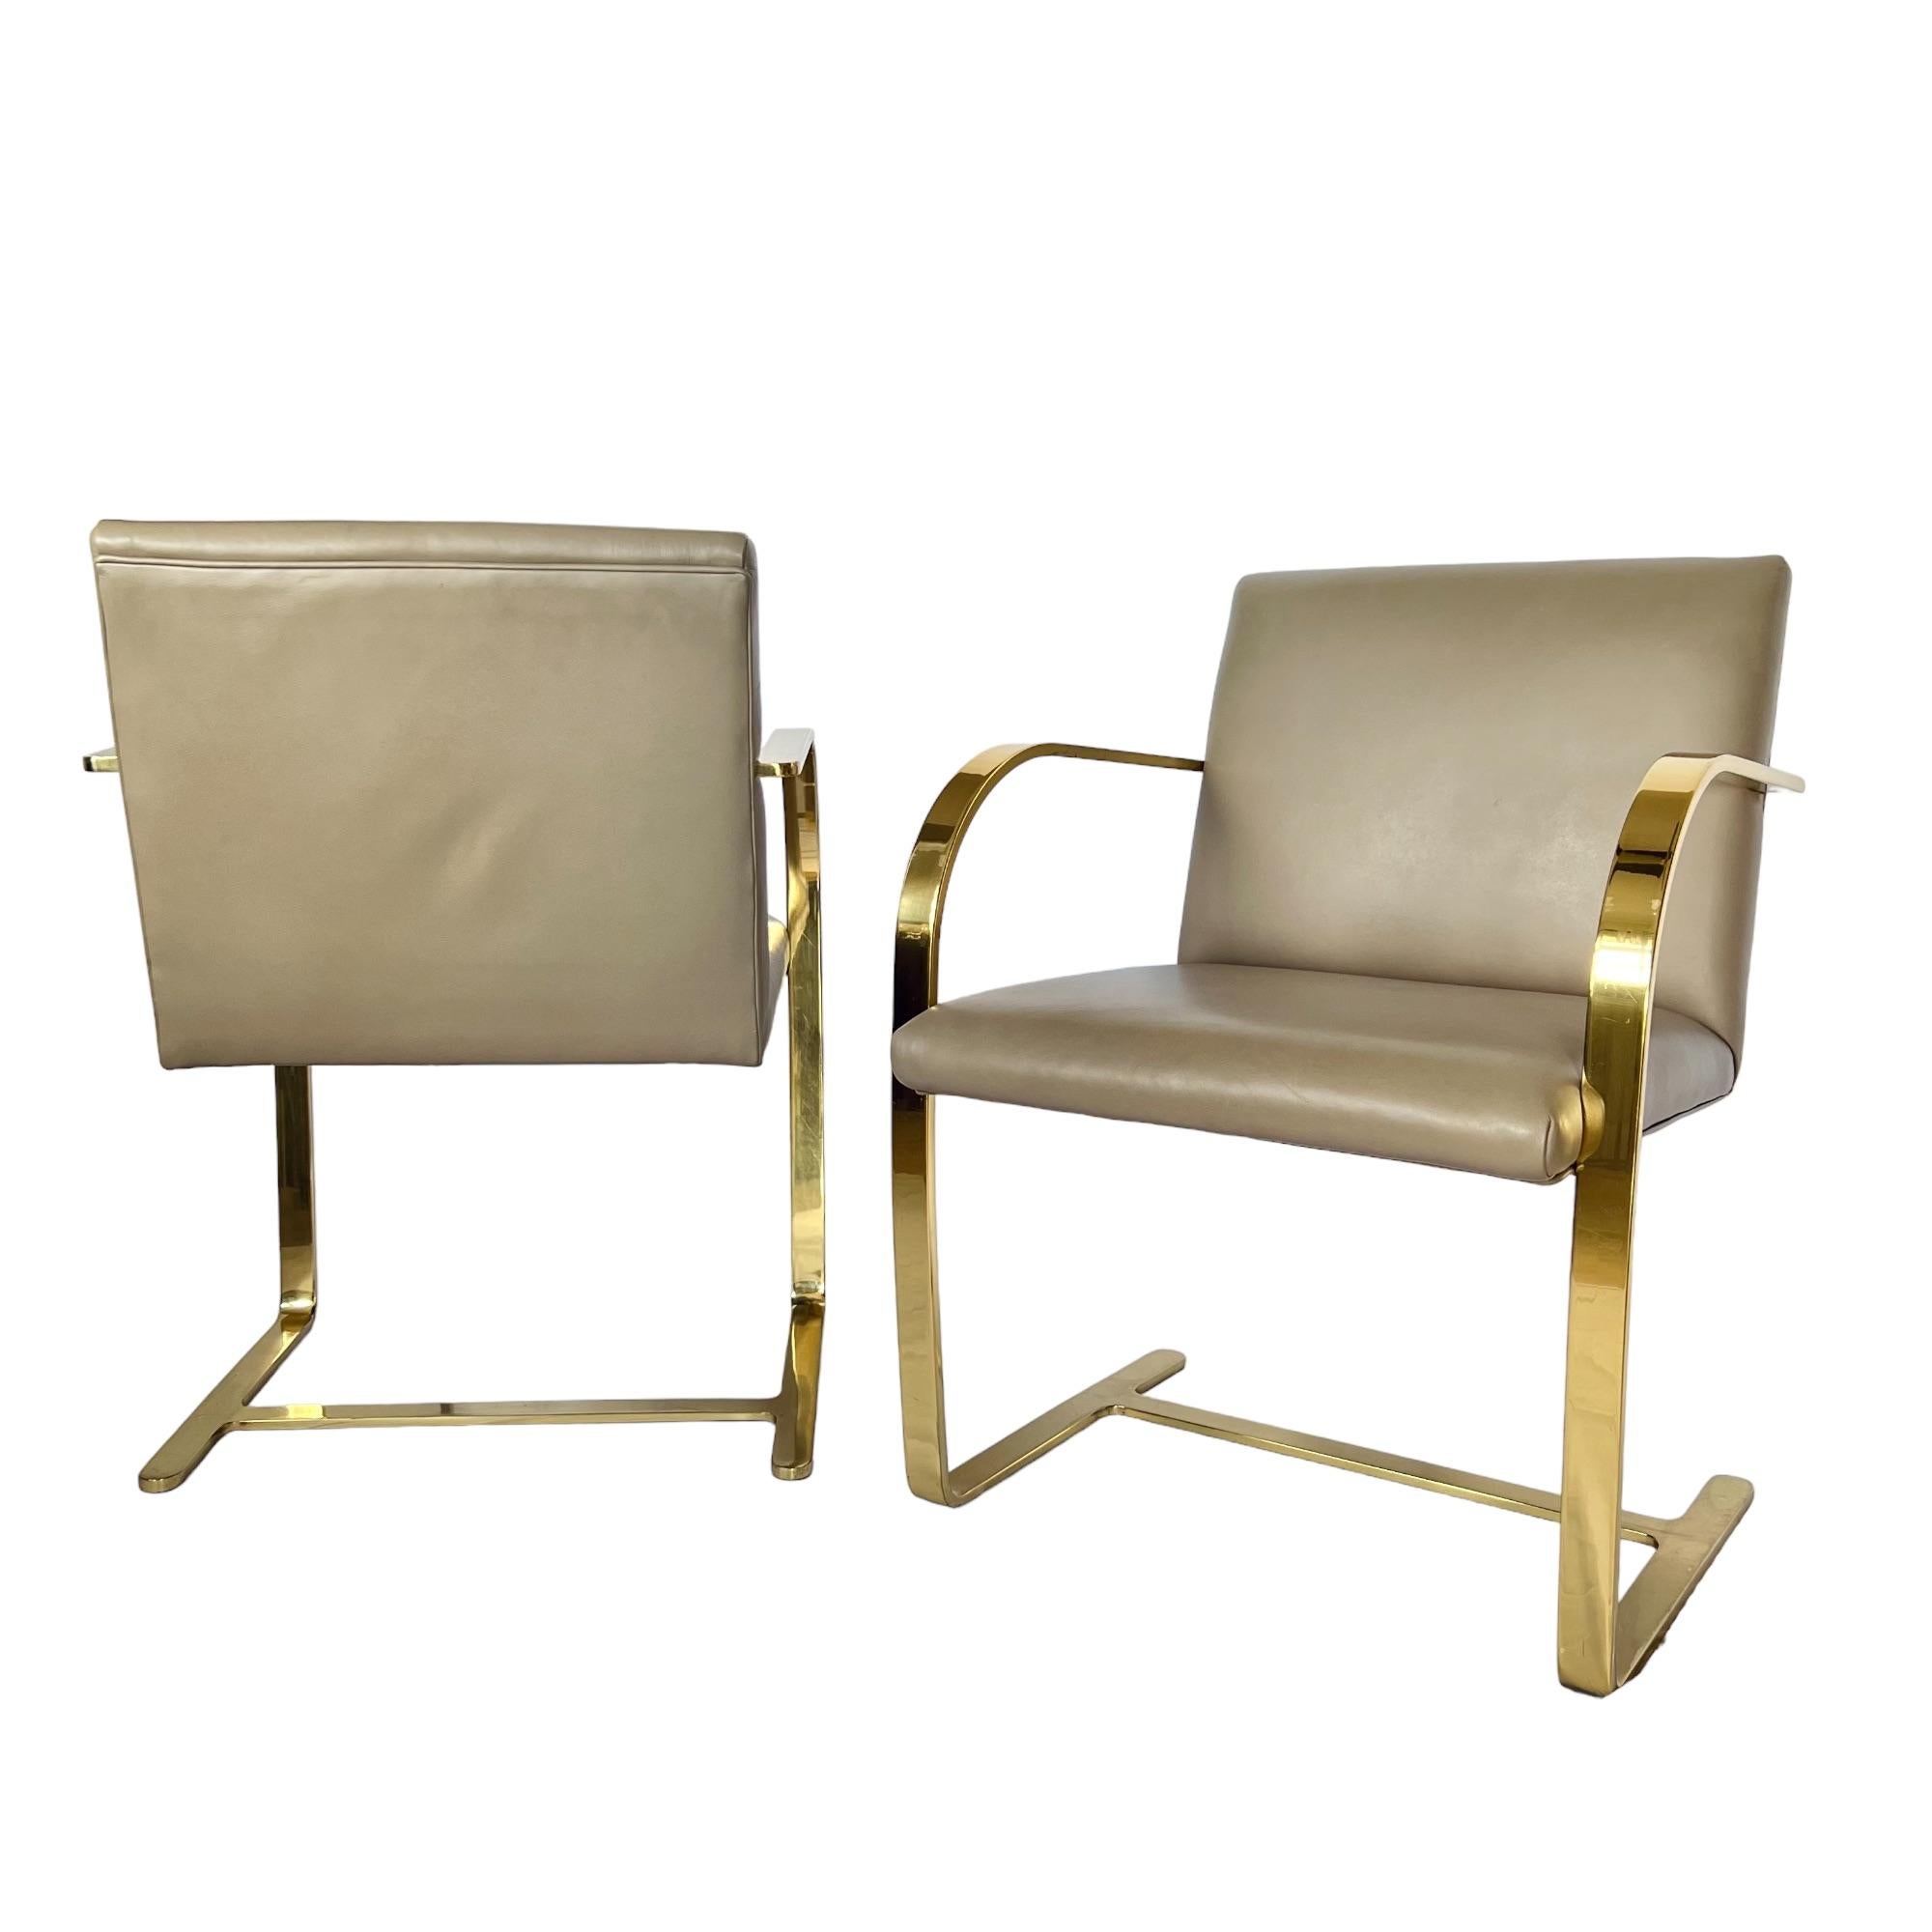 Polished Mies Van Der Rohe Brno Gold Brass Flat Bar Leather Chairs, a Pair